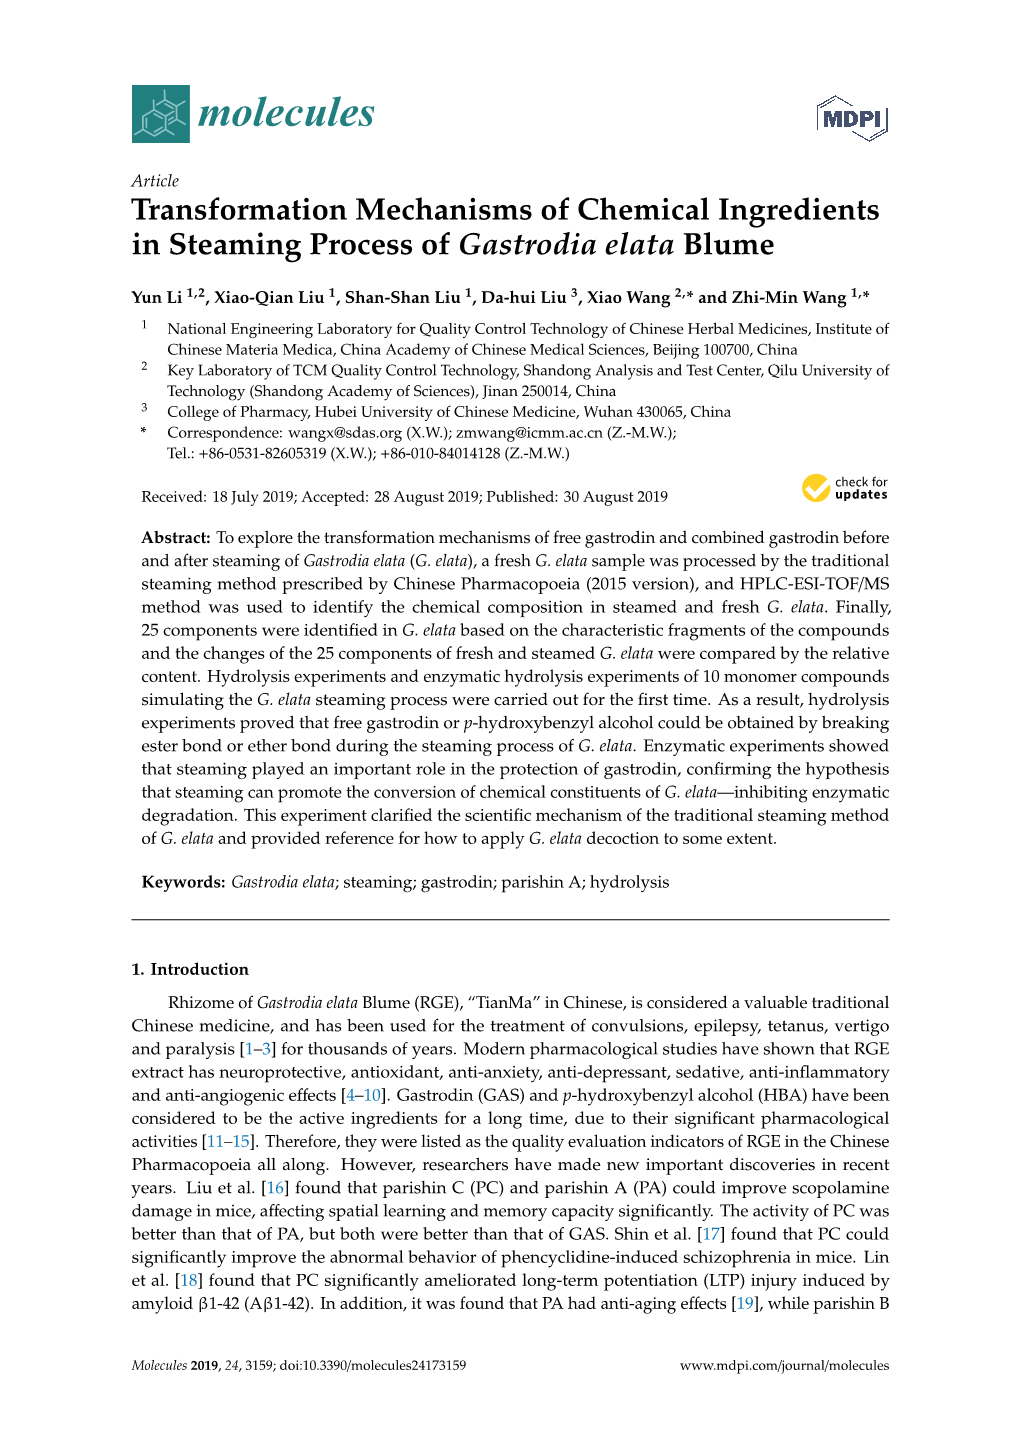 Transformation Mechanisms of Chemical Ingredients in Steaming Process of Gastrodia Elata Blume